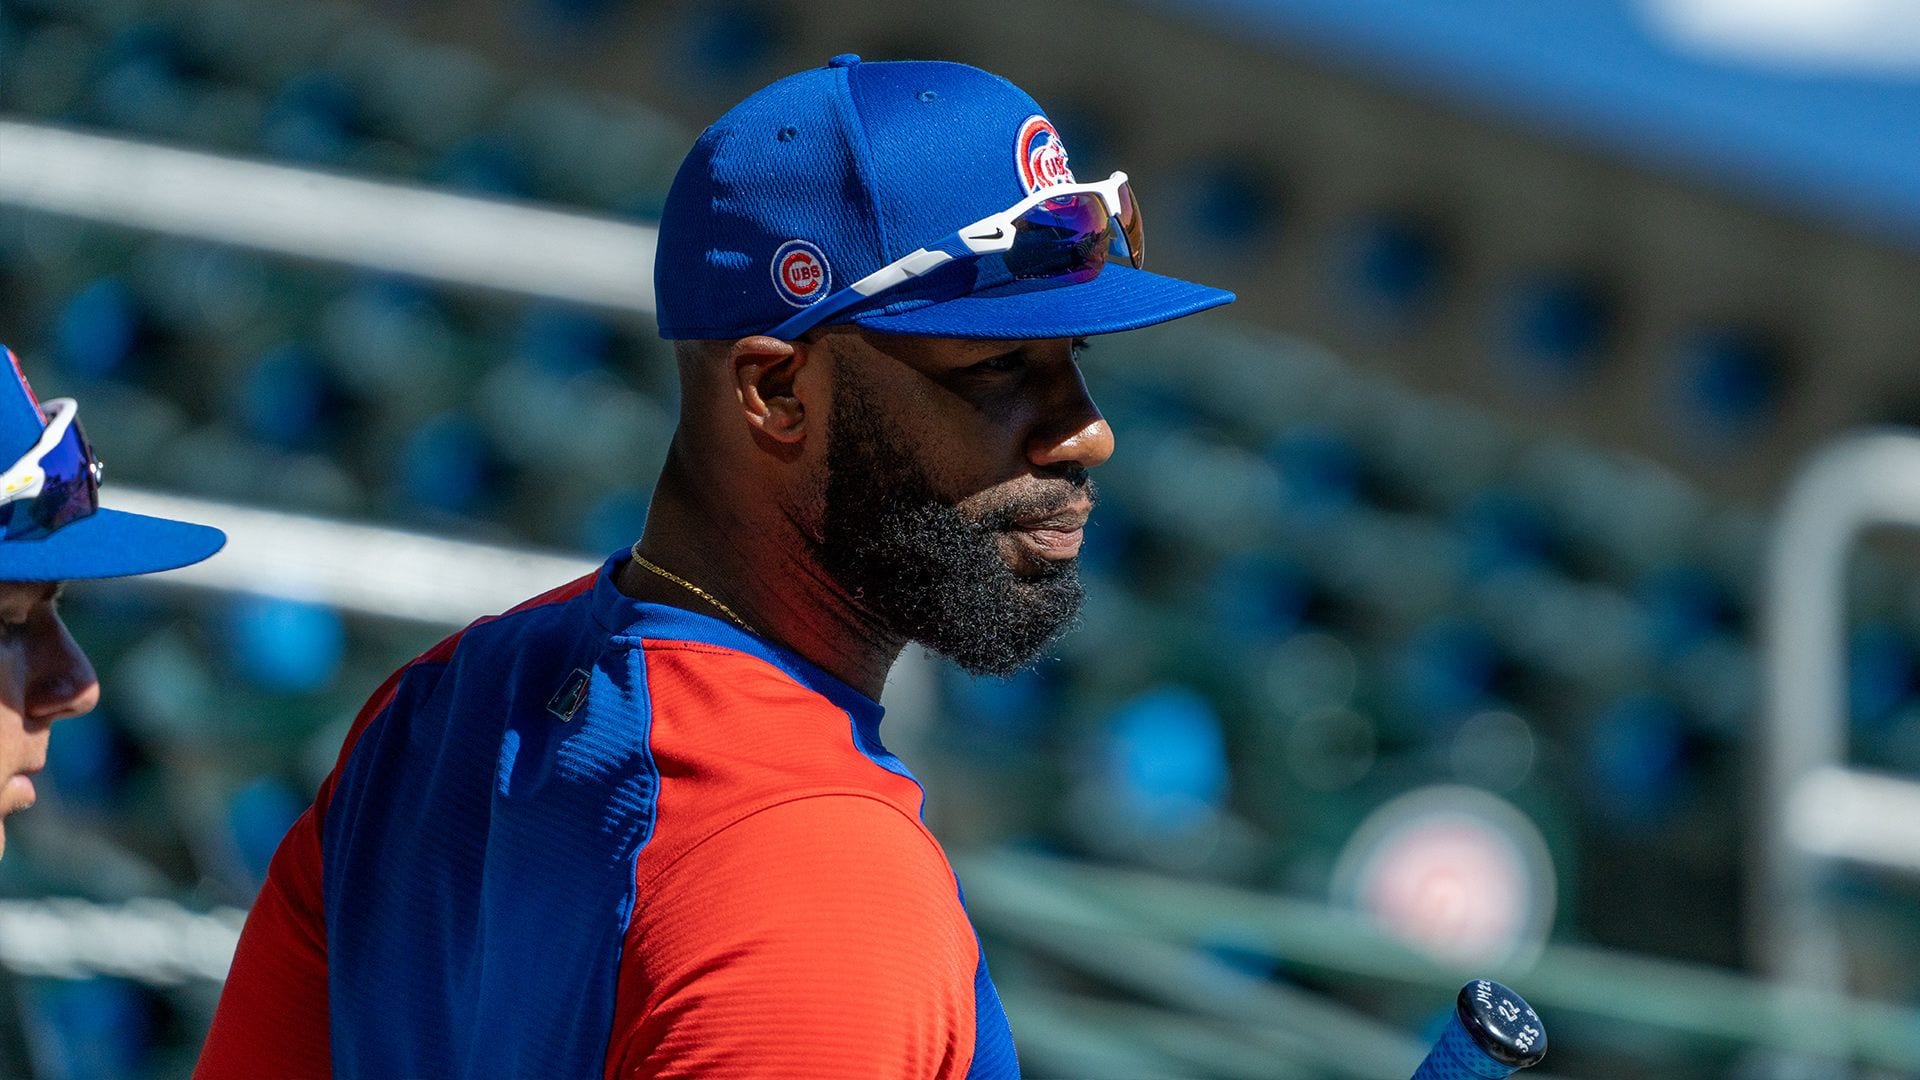 Jason Heyward's authentic self-expression shines a light on his culture,  guides his service - Marquee Sports Network